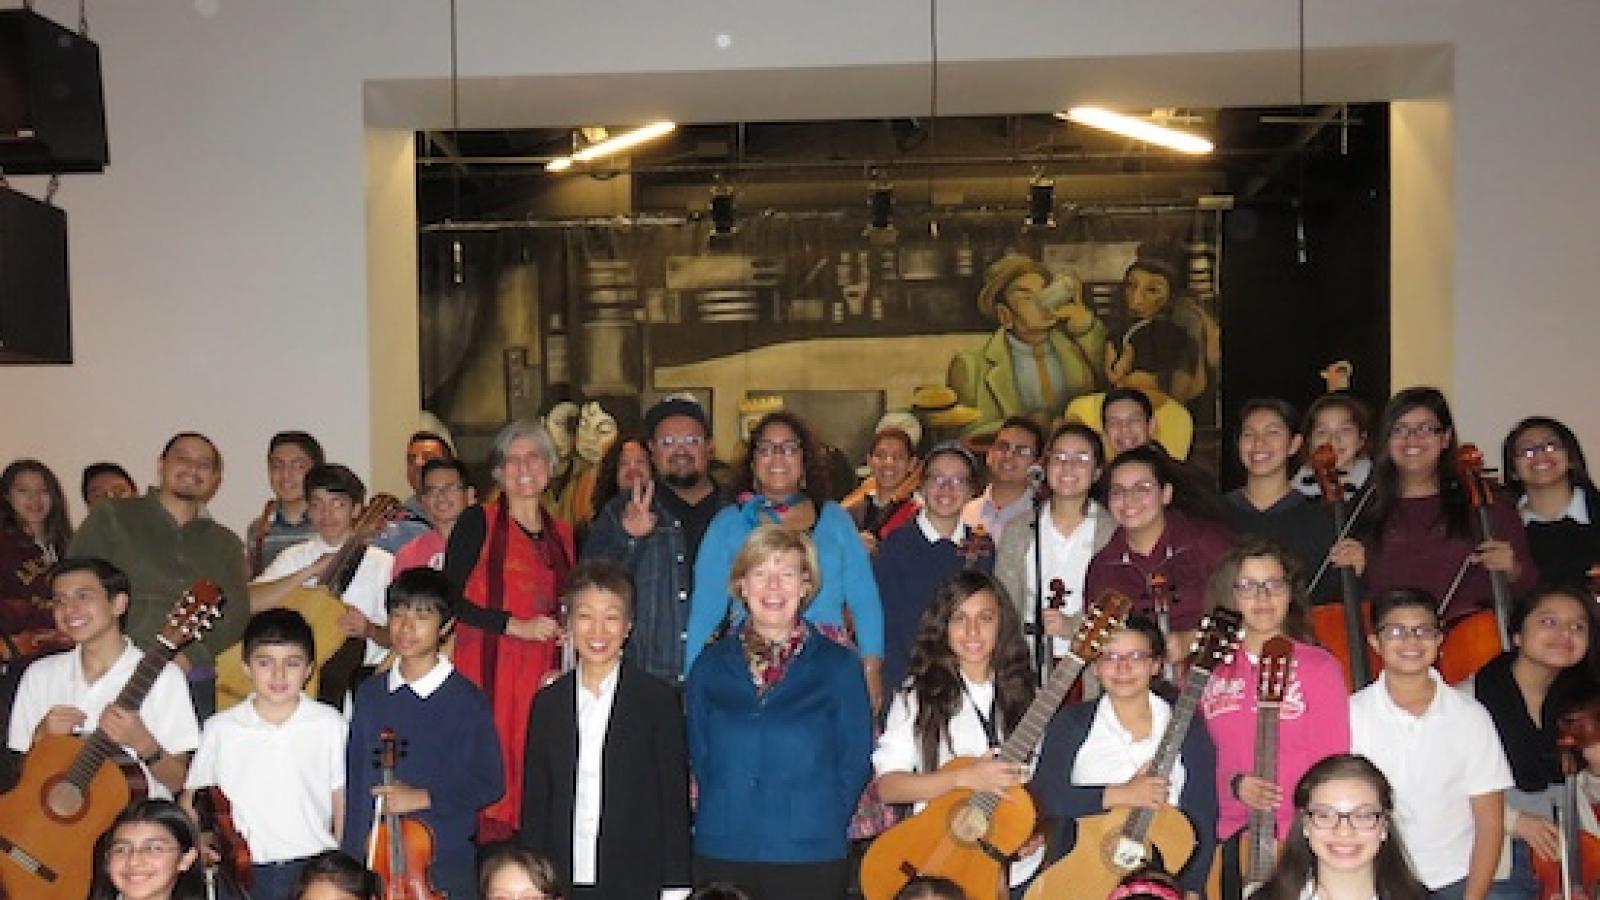 Jane Chu and Senator Tammy Baldwin with a large group of kids holding stringed instruments